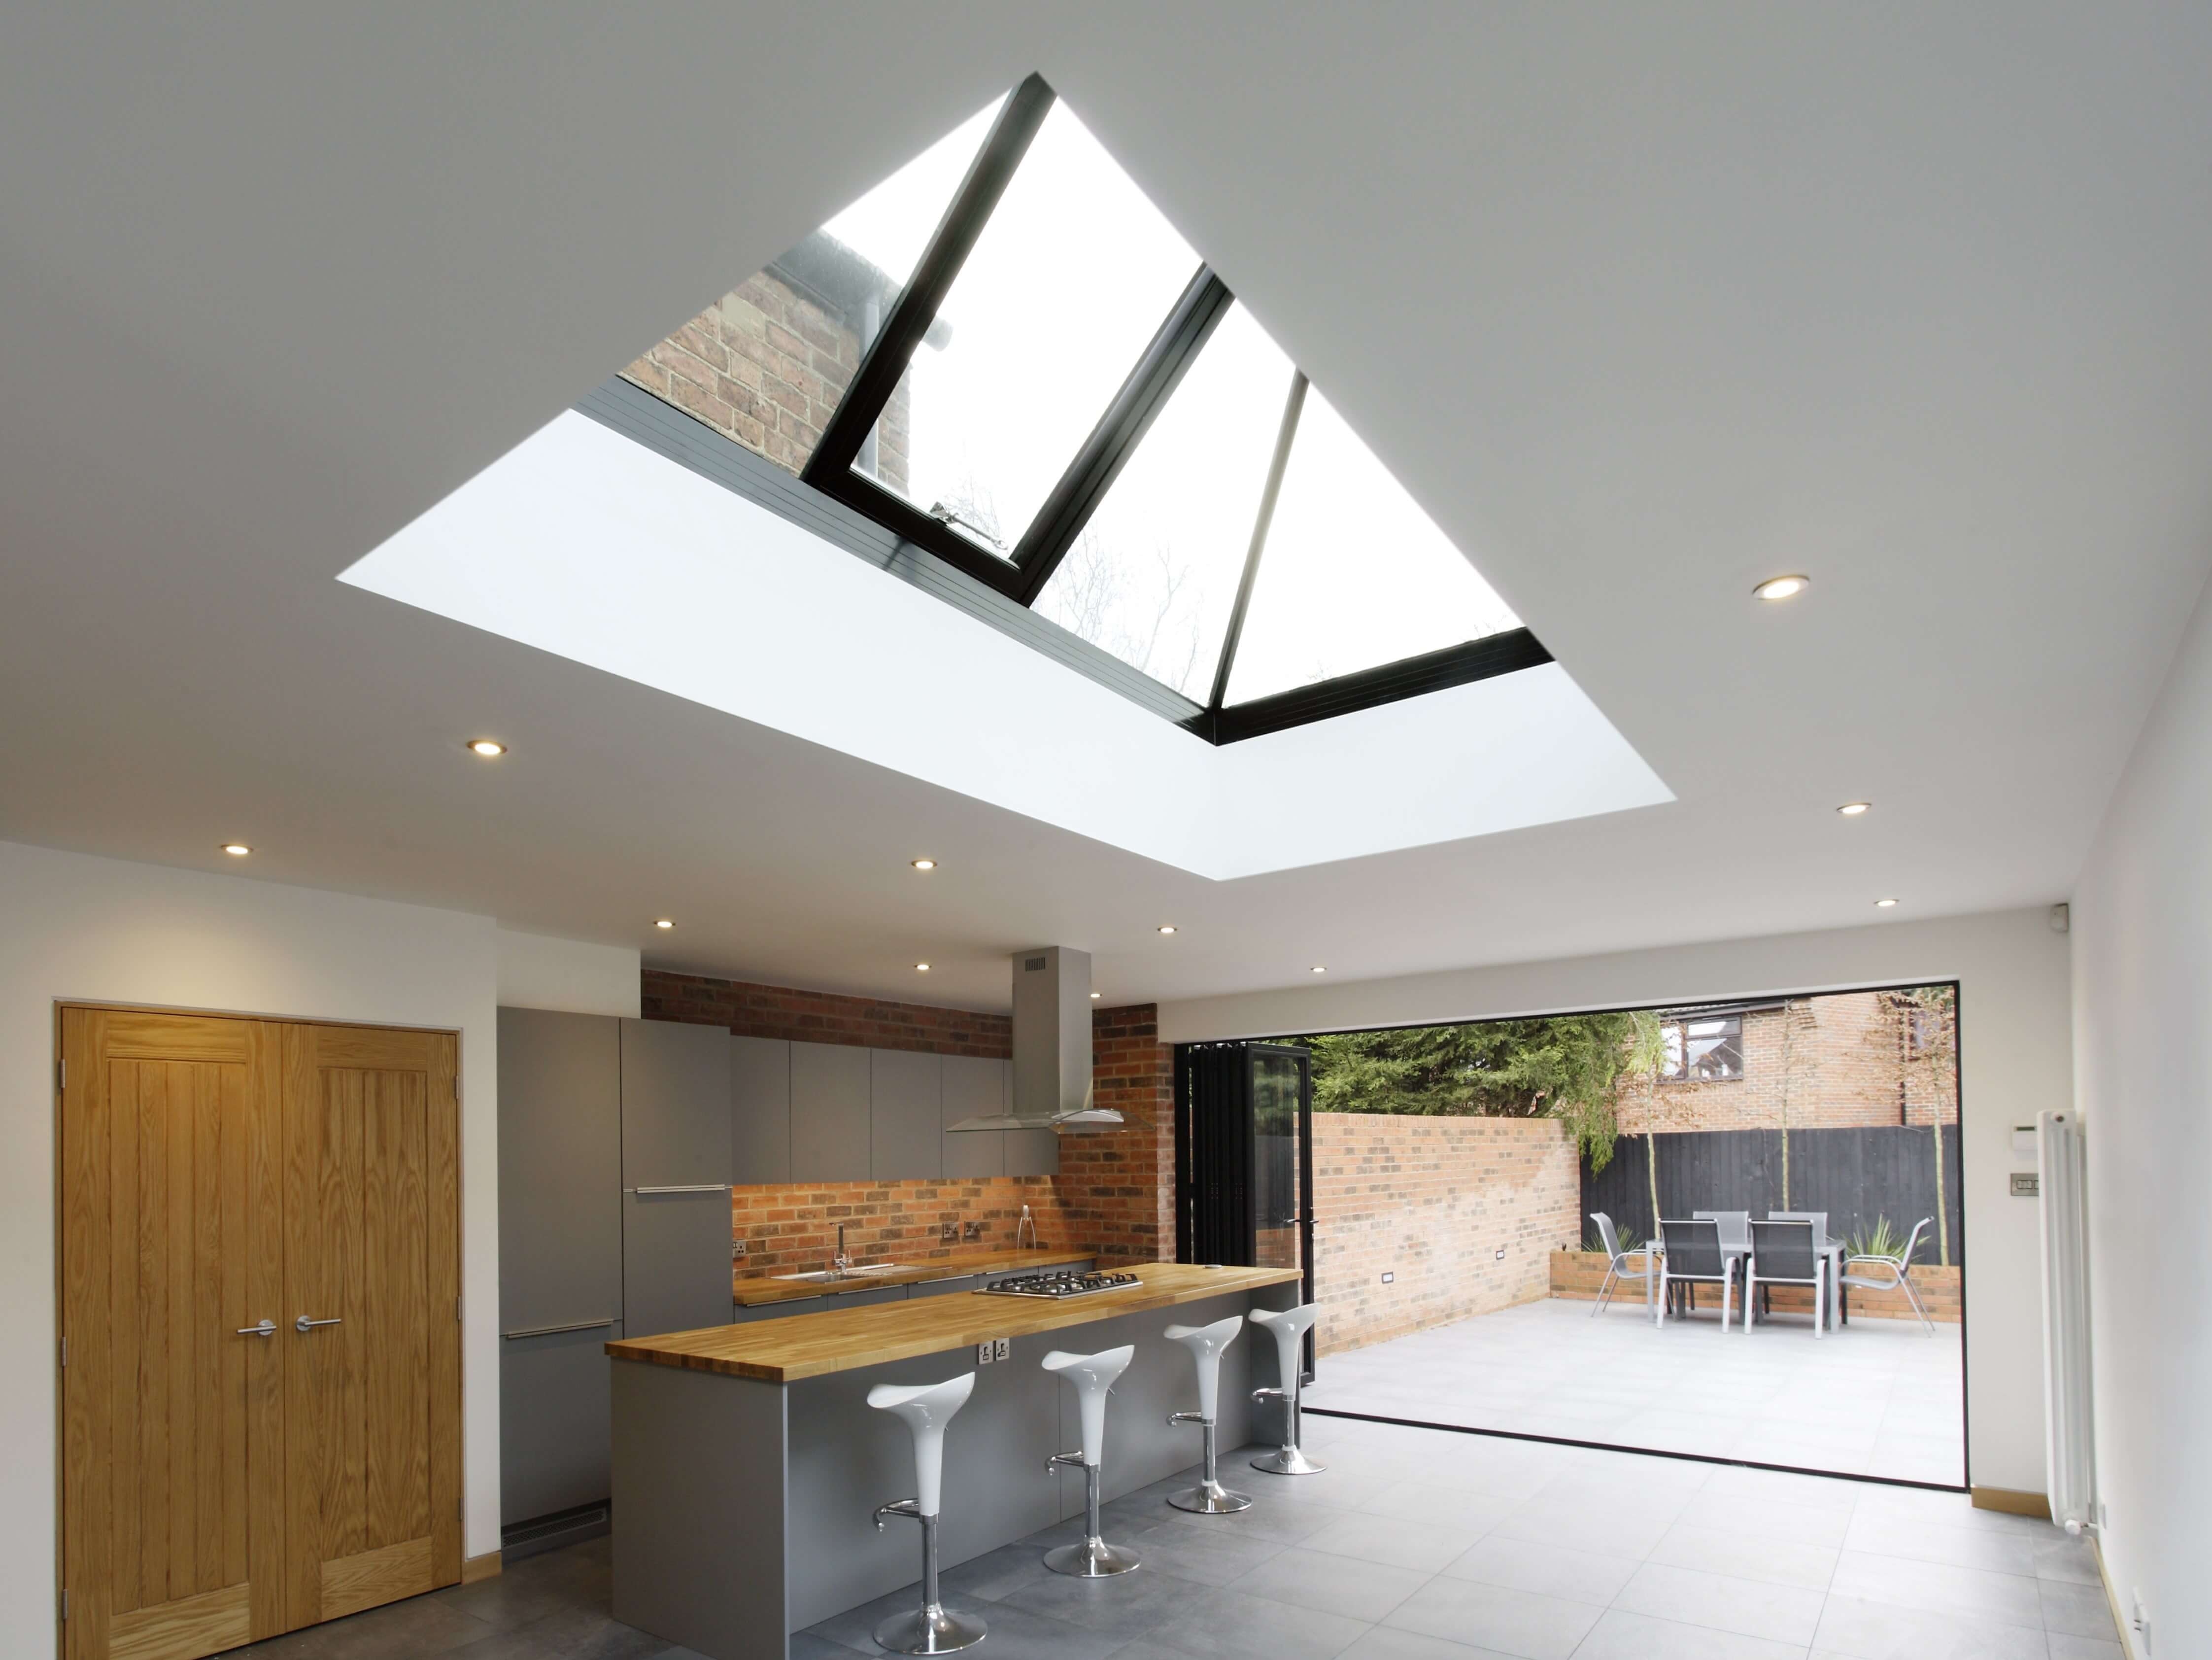 Bi-fold doors opening onto a contemporary garden, with a vented lantern above